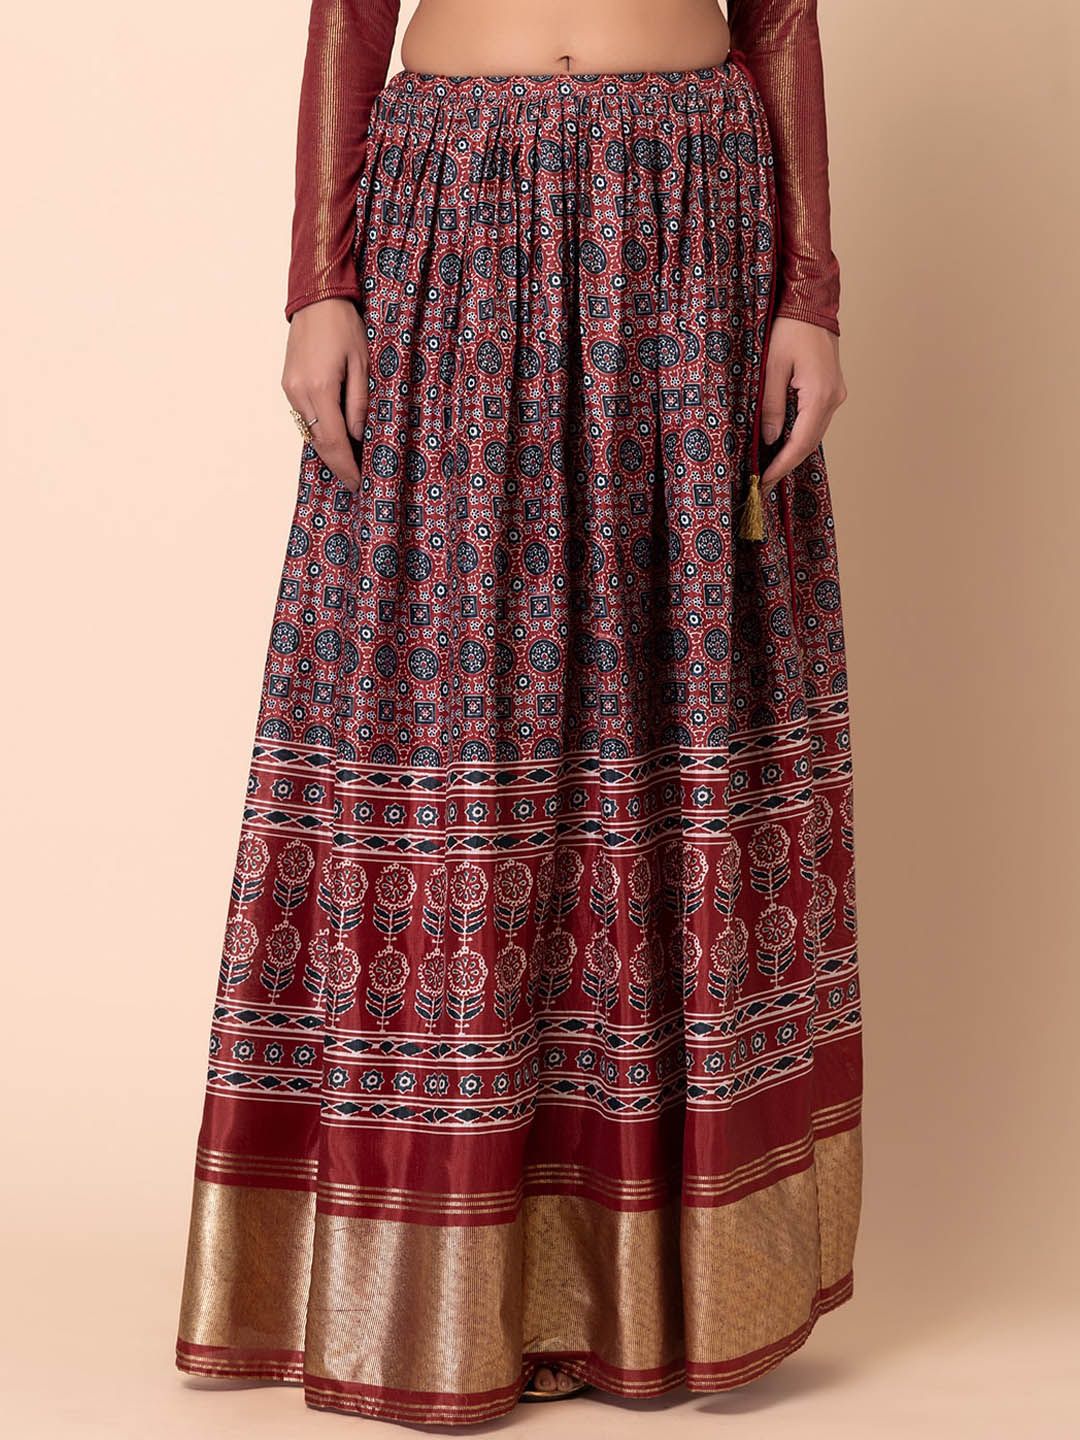 INDYA Printed Flared Skirts Price in India